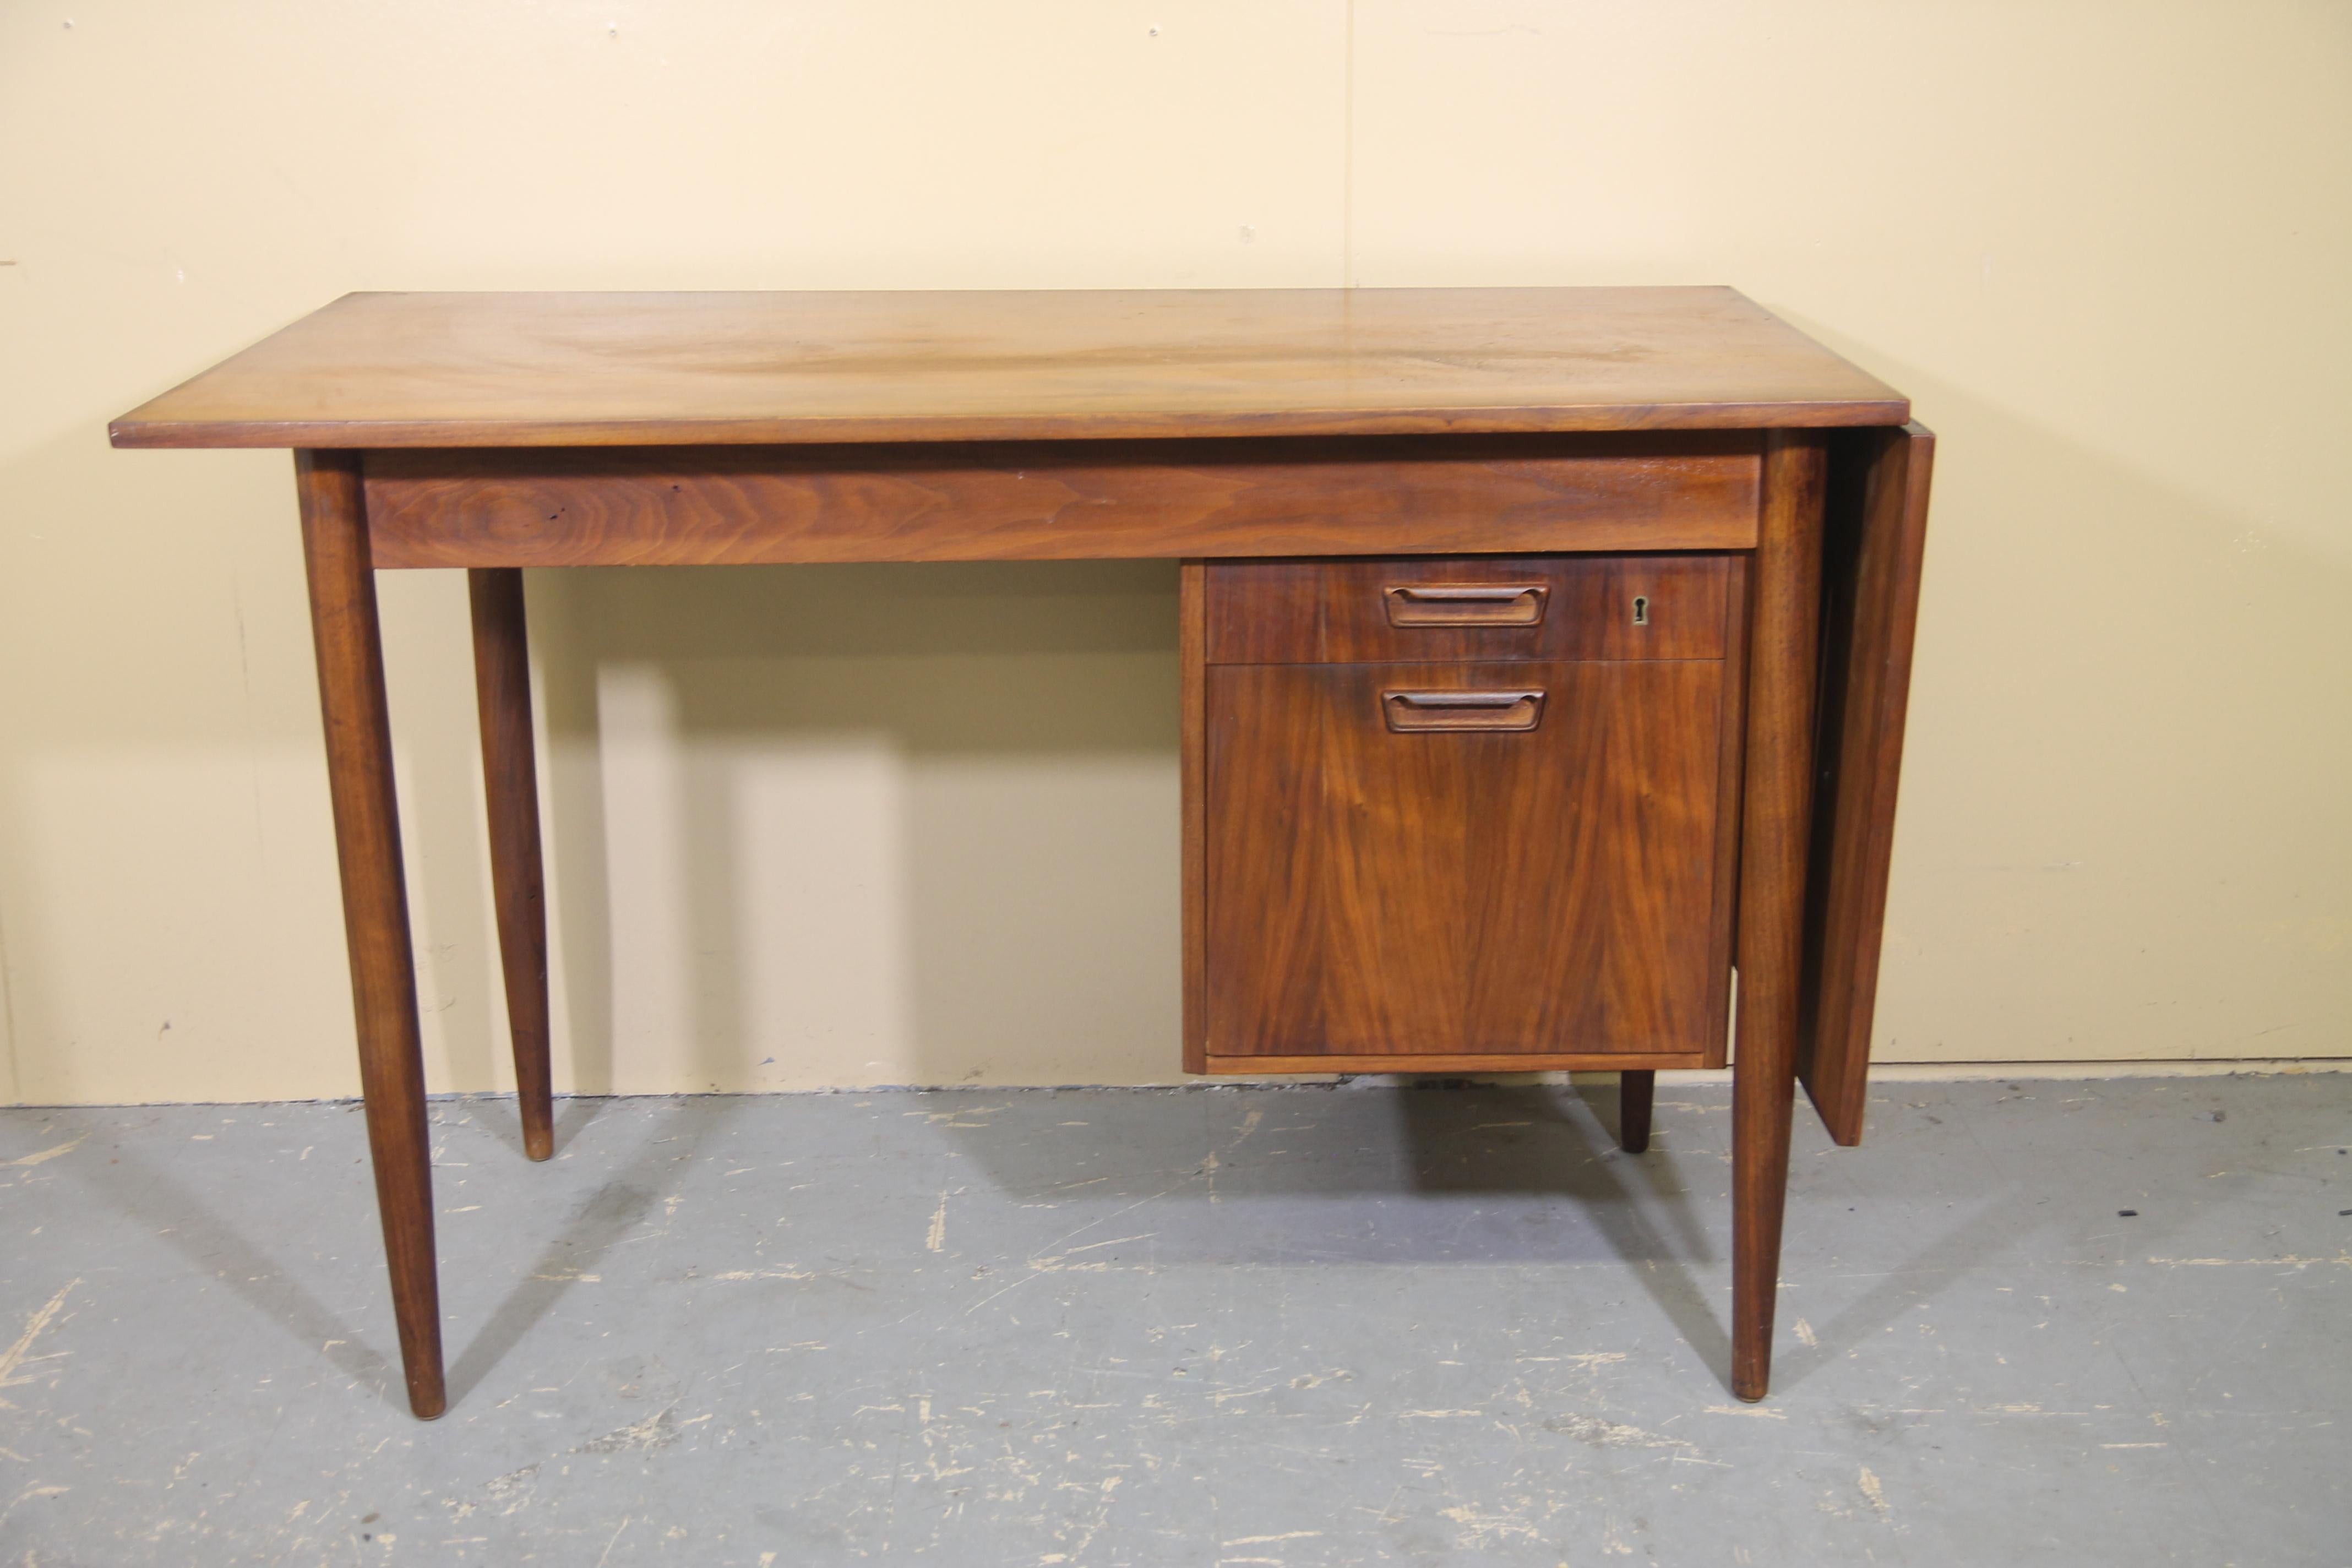 Nice 1960s desk attributed to Arner Vodder. This desk has a drop leaf top when opened goes from 46 inches to 64.75. File cabinet also slides from side to side. A nice classic versatile desk ready for you home office.